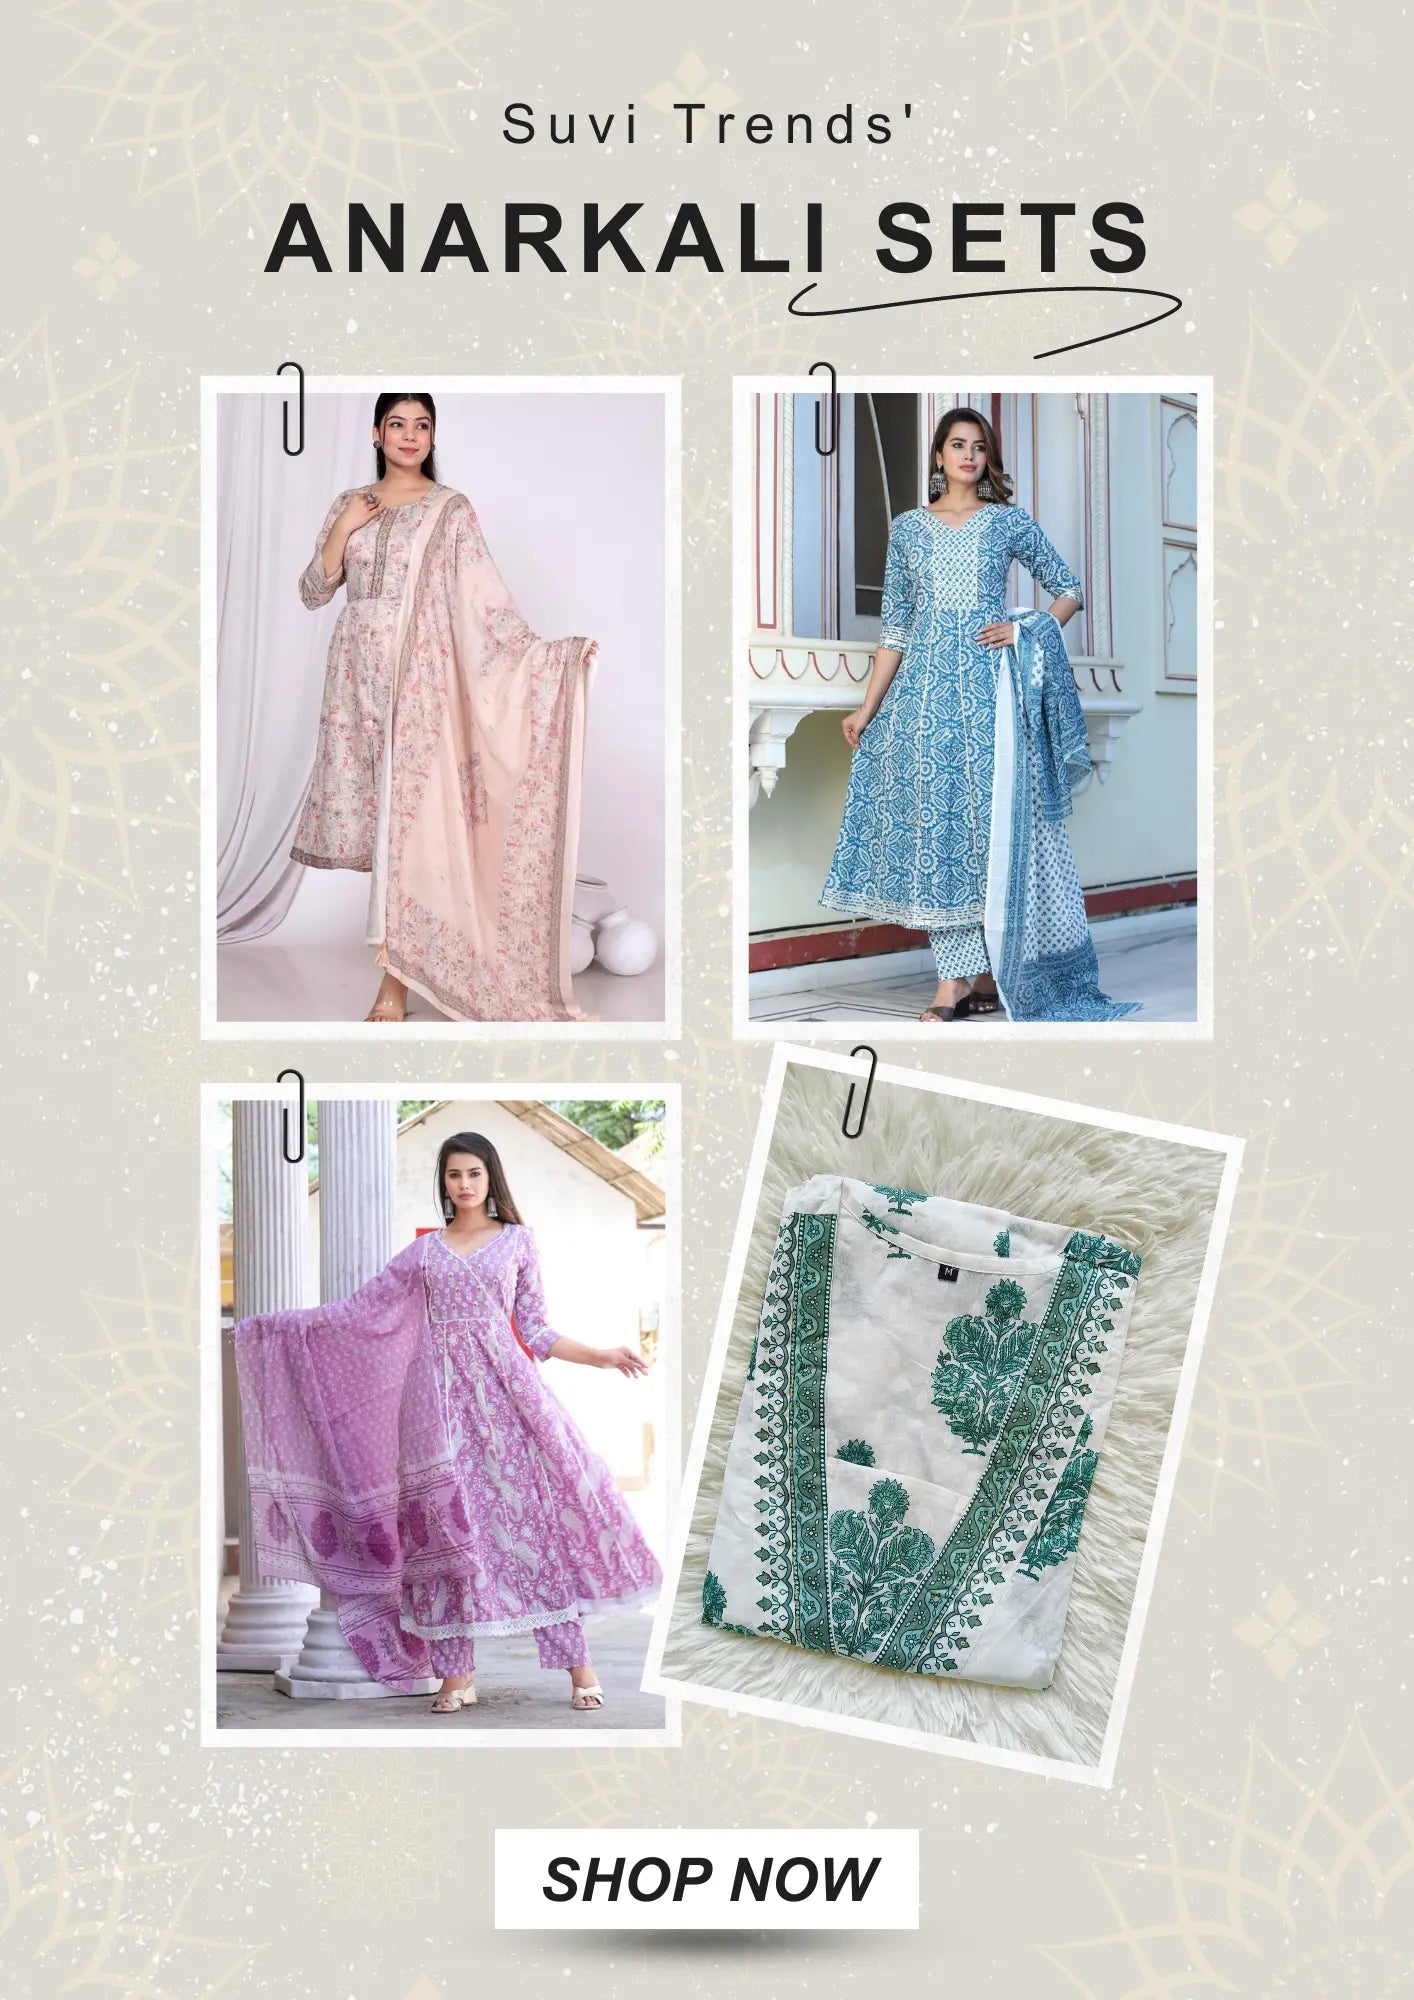 Shop for exclusive Anarkali collections from Suvi Trends. Featuring a range of high-quality fabrics, these luxury Anarkali dresses and suits are perfect for any special occasion or festive wear. Enjoy a perfect fit with top notch quality, all available online from Suvi Trends Malaysia.